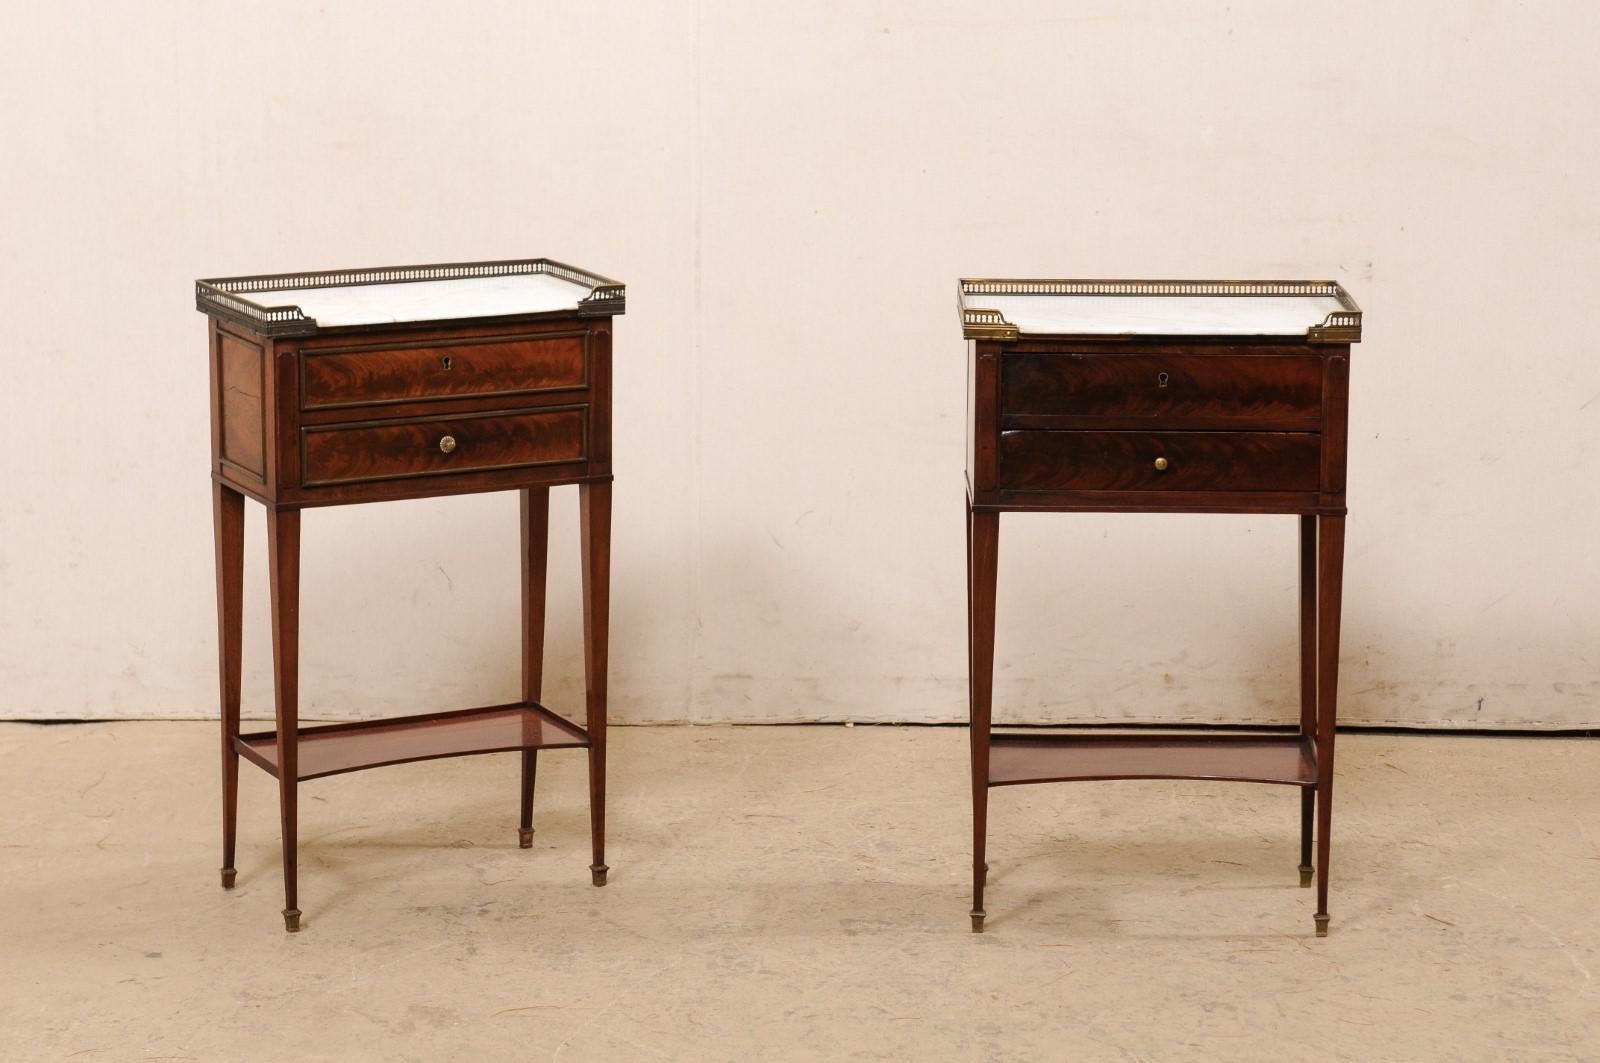 A French near-pair of marble-top side chests with lower shelf, from the early 20th century. These antique commodes from France each feature a rectangular-shaped white marble top, surrounded with a raised brass gallery on three sides, atop a case